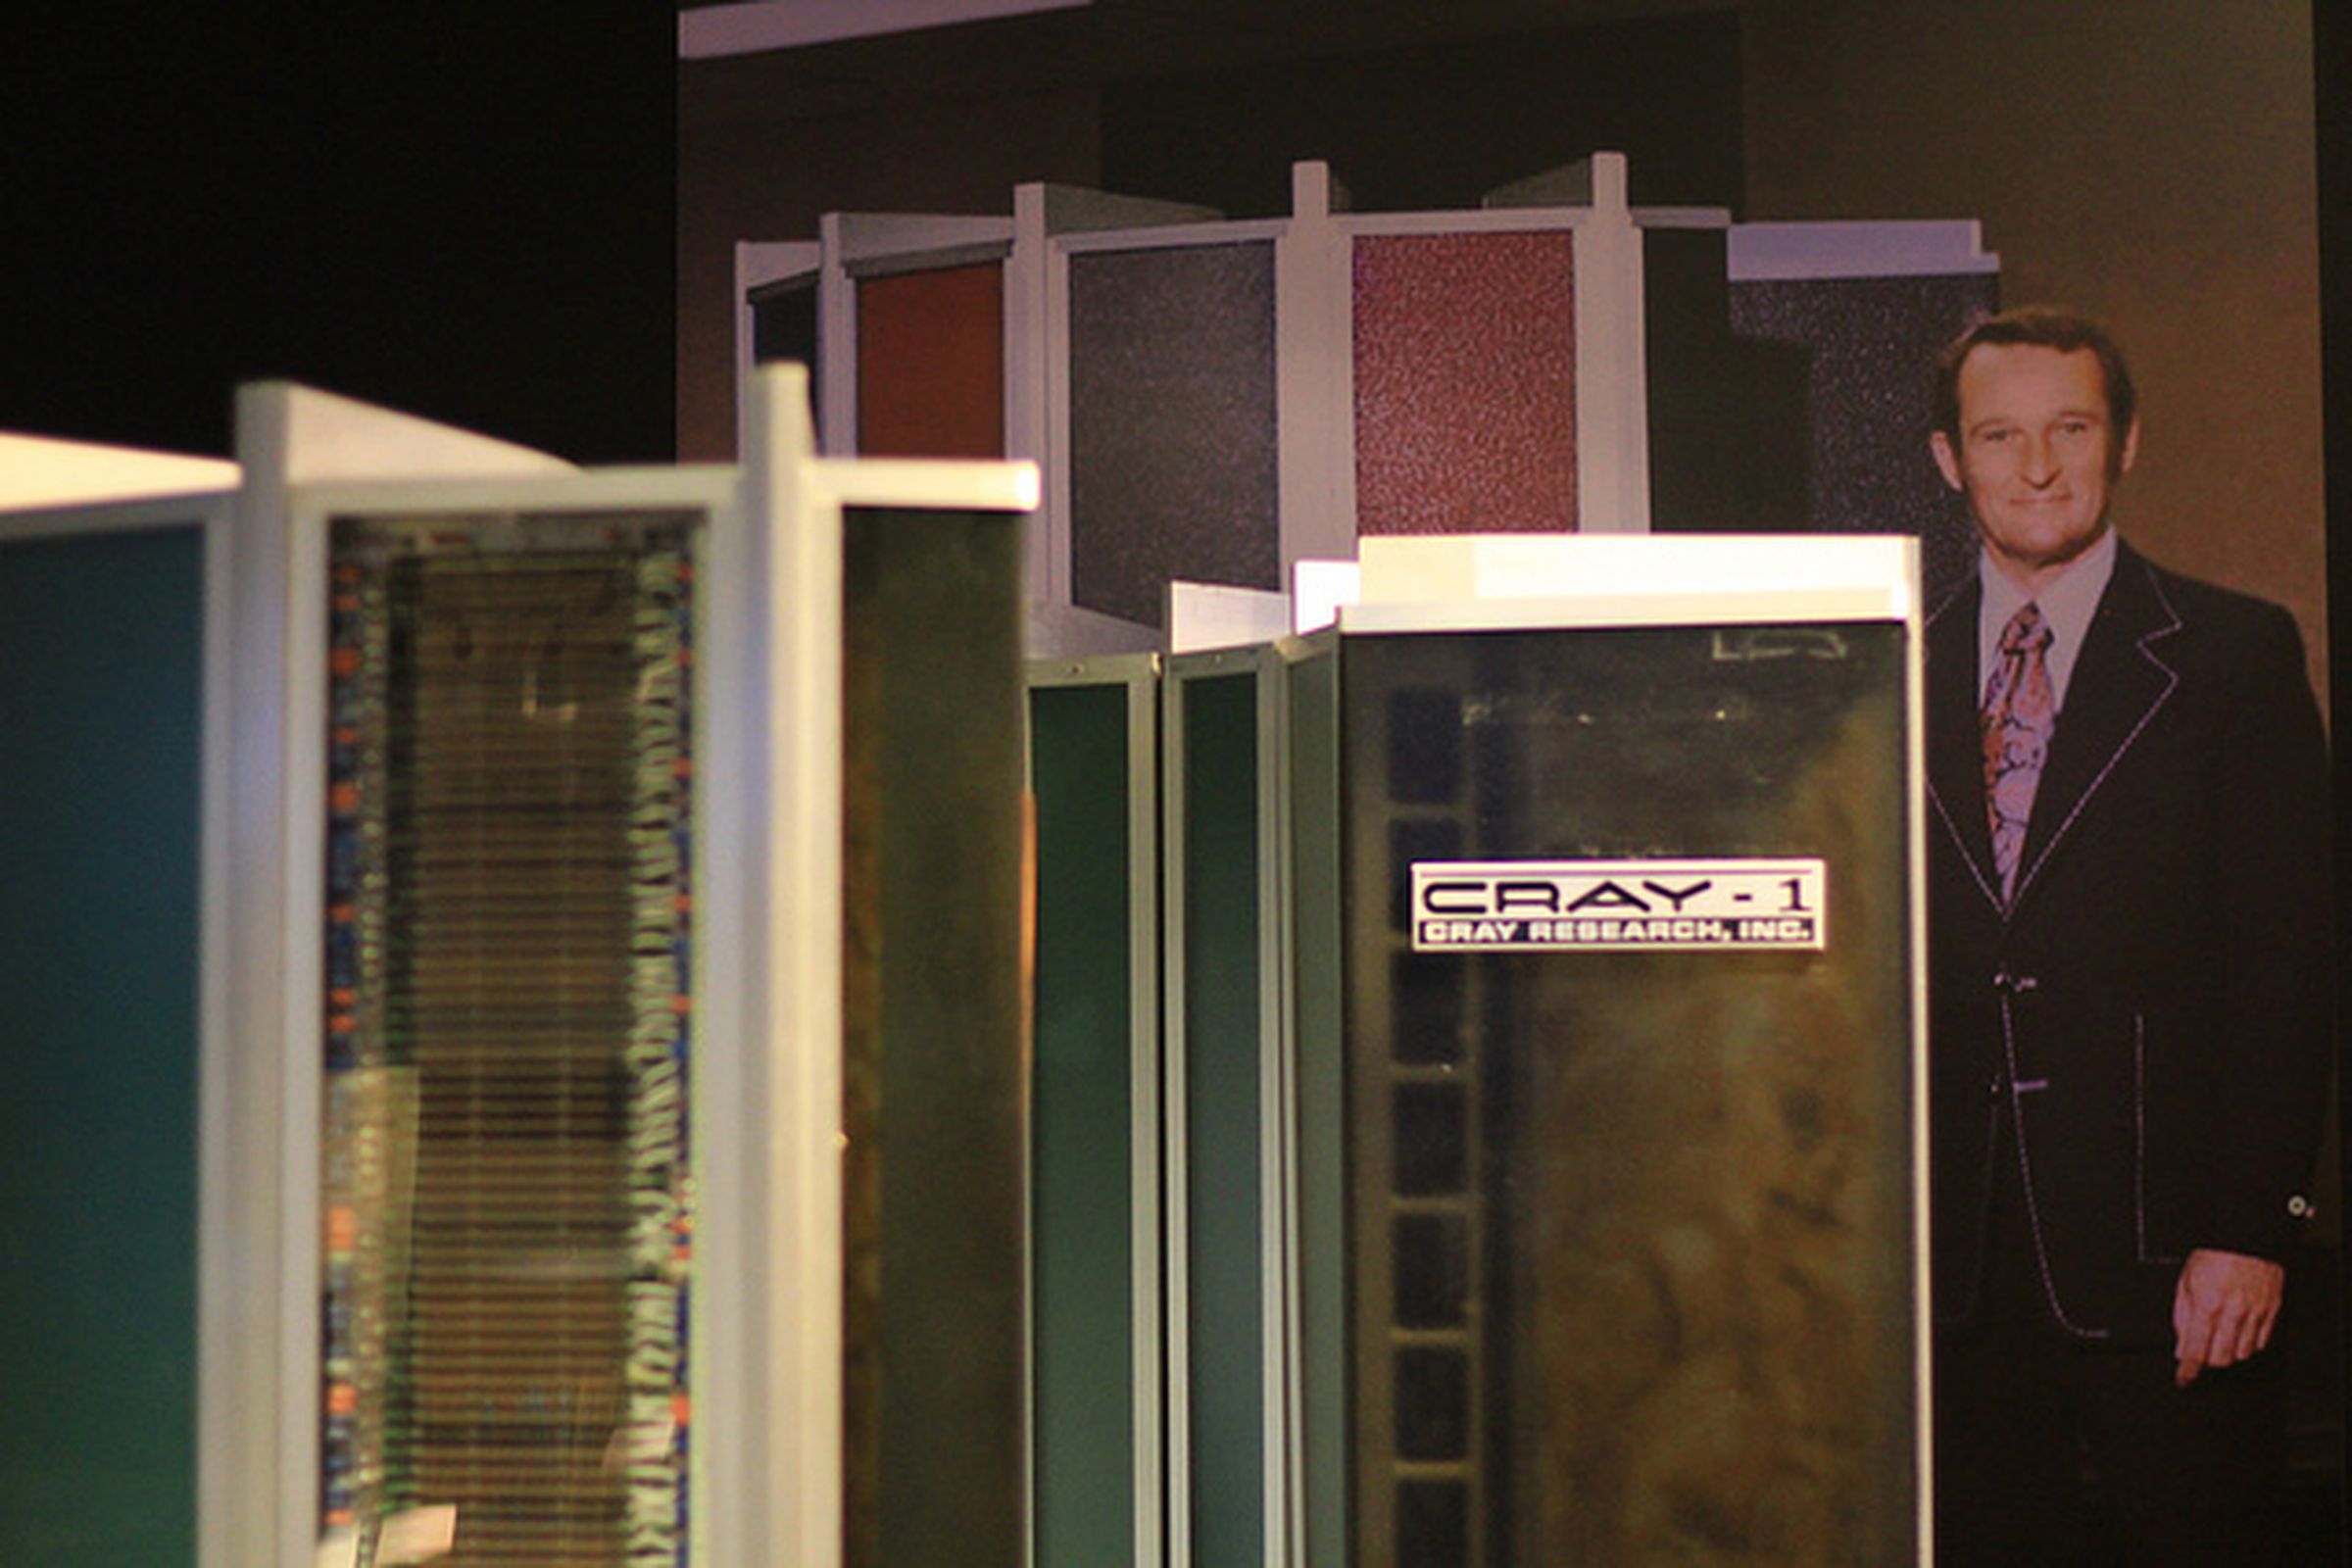 The Cray-1 supercomputer and its creator, Seymour Cray.